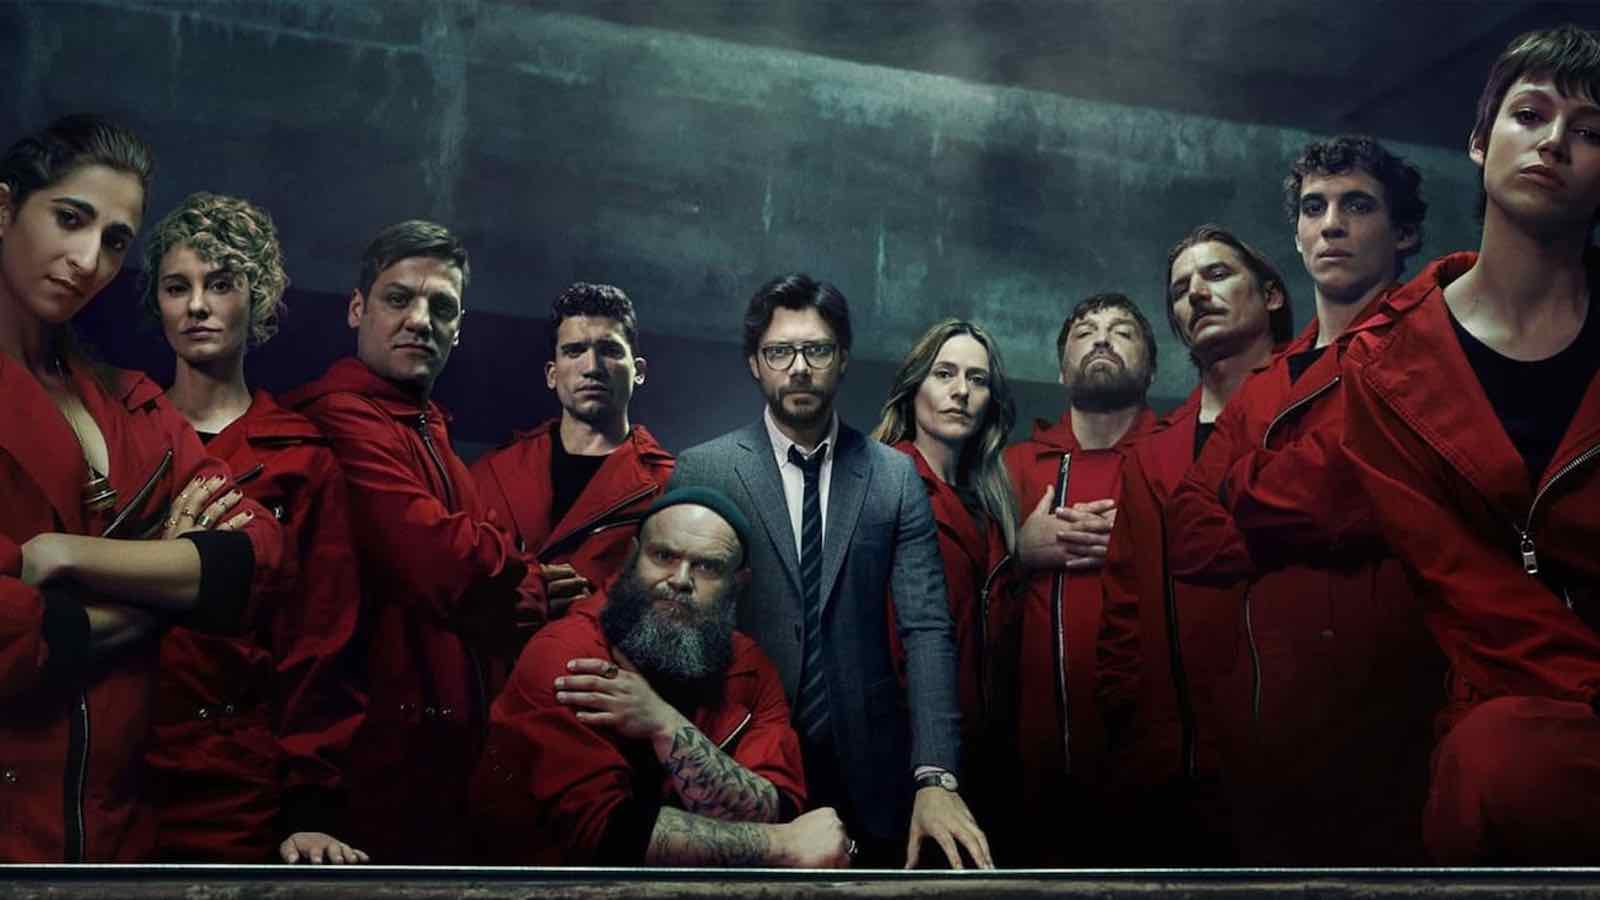 As we anxiously await 'Money Heist' part 4’s return in January 2020, let’s review the best violations of the Professor’s “no attachment rule”.